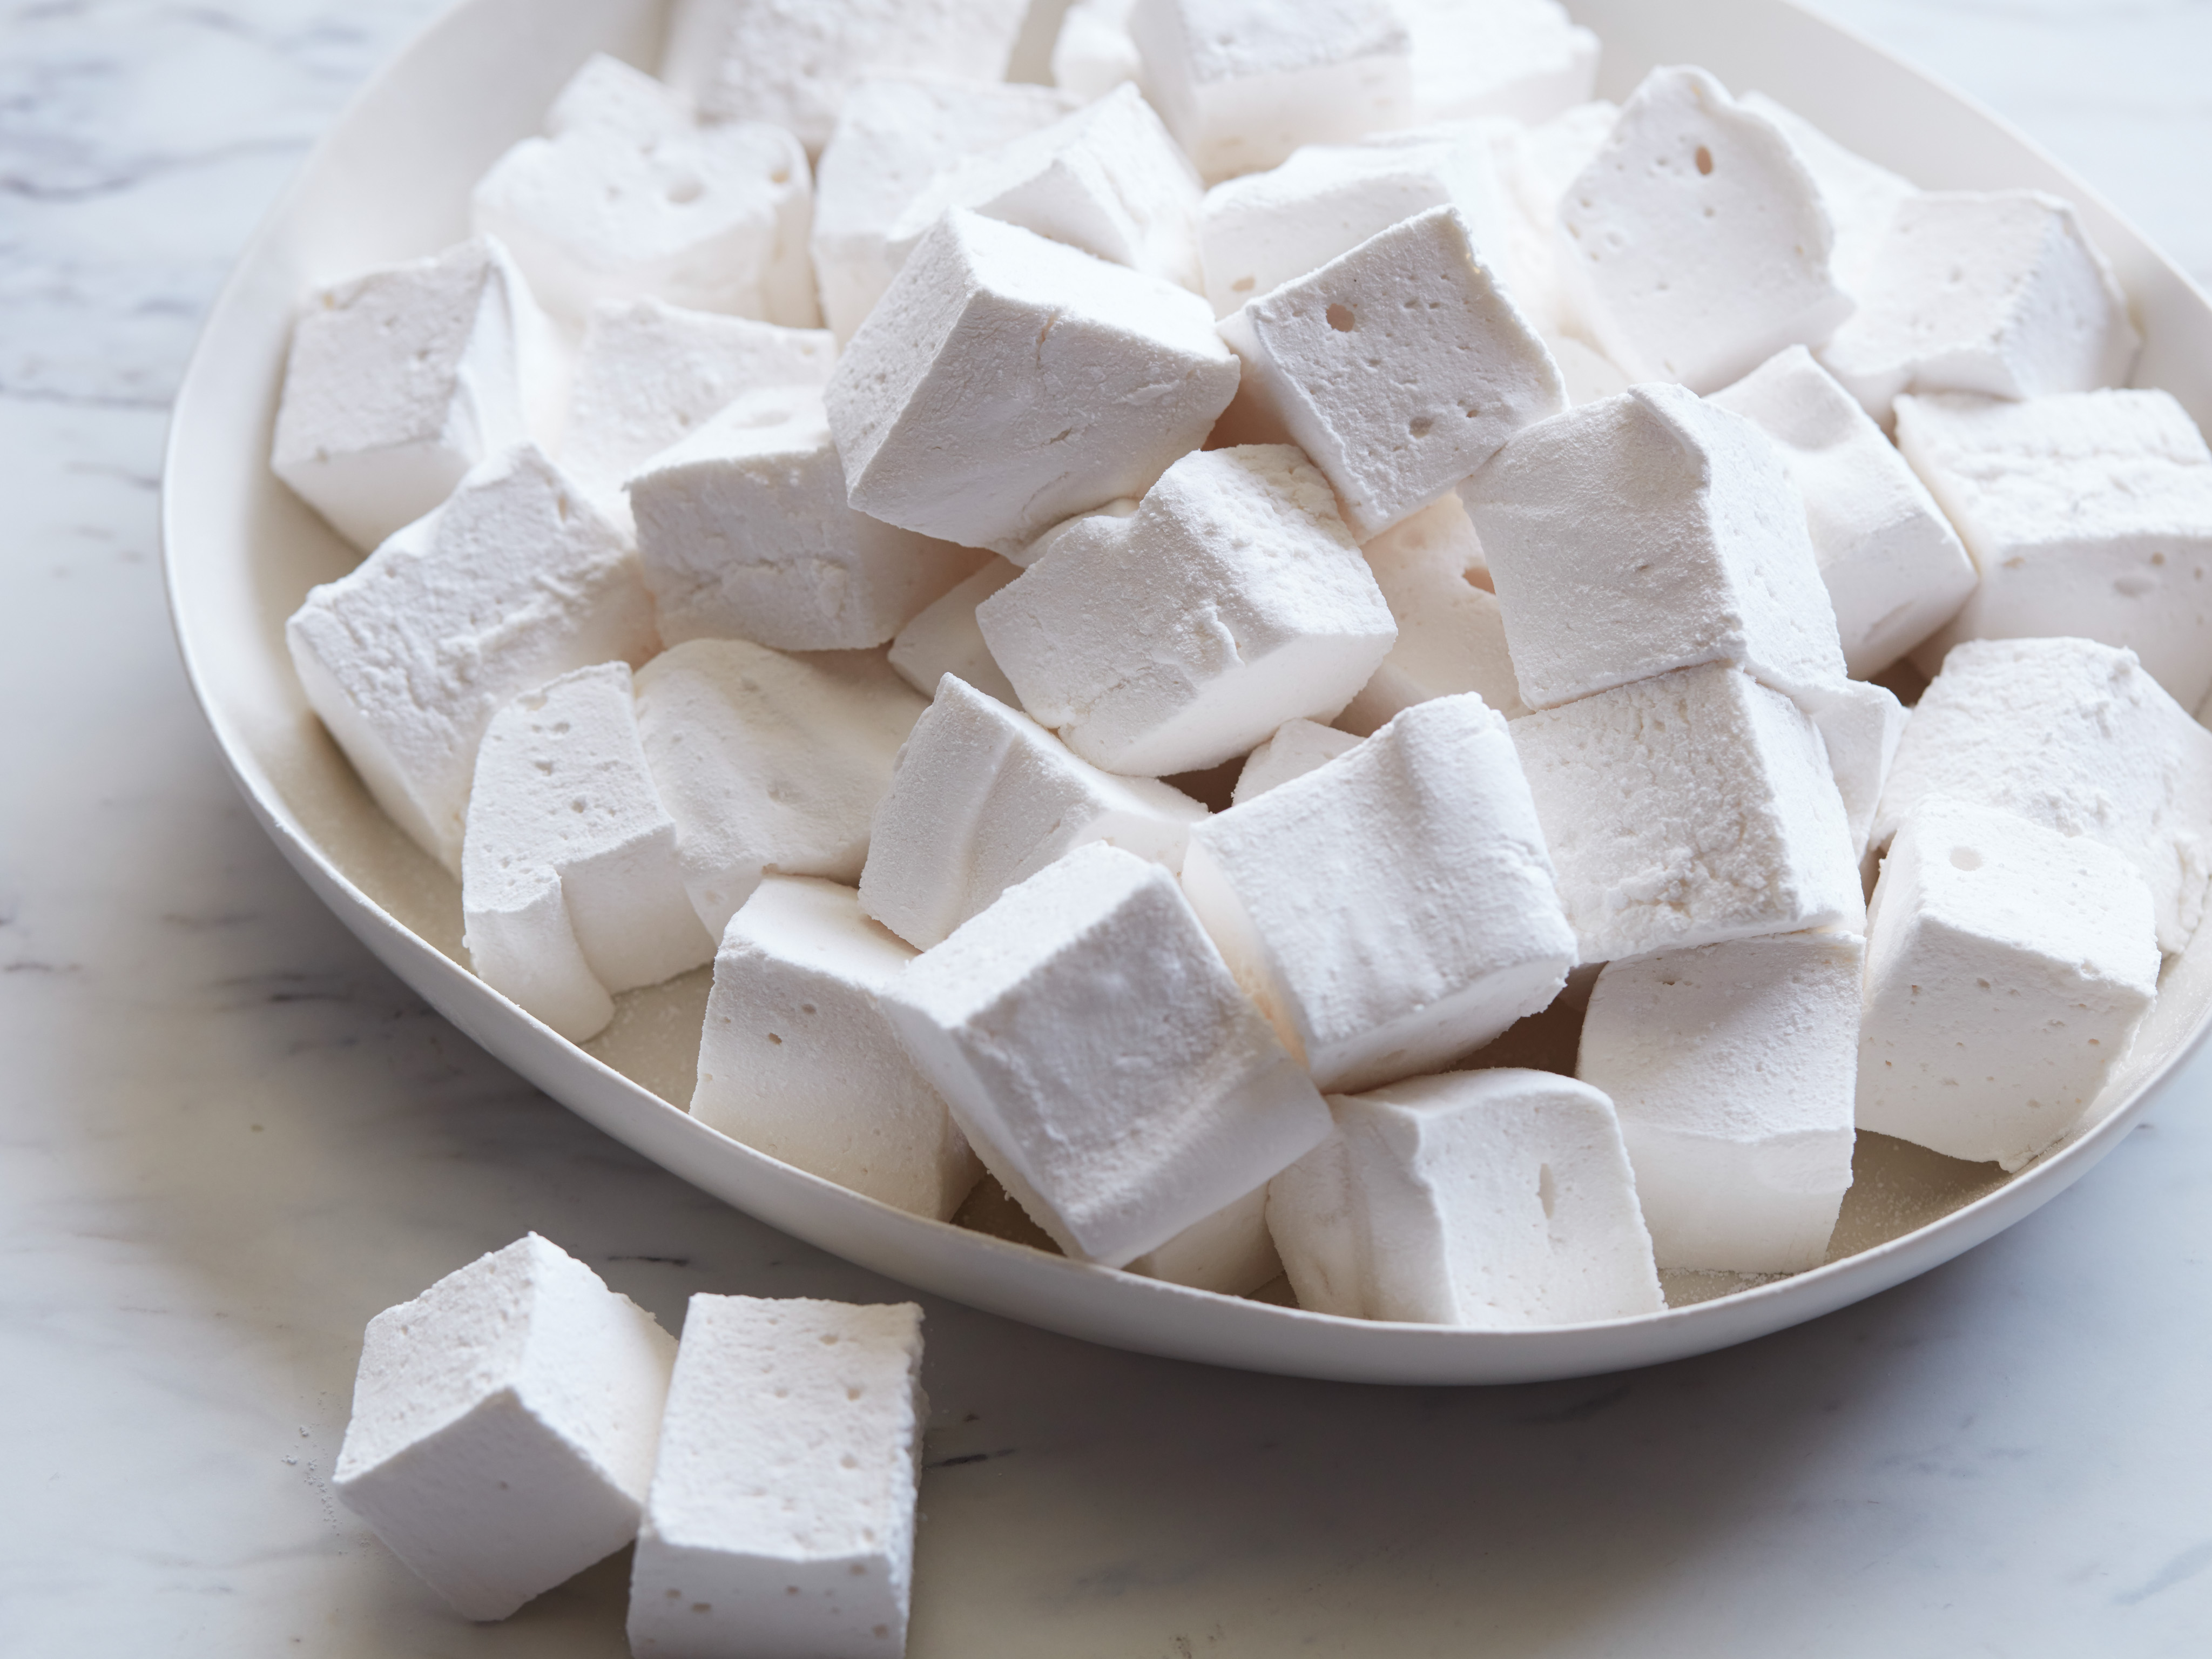 How To Make Marshmallows (Tips And Tricks For Homemade Marshmallows)